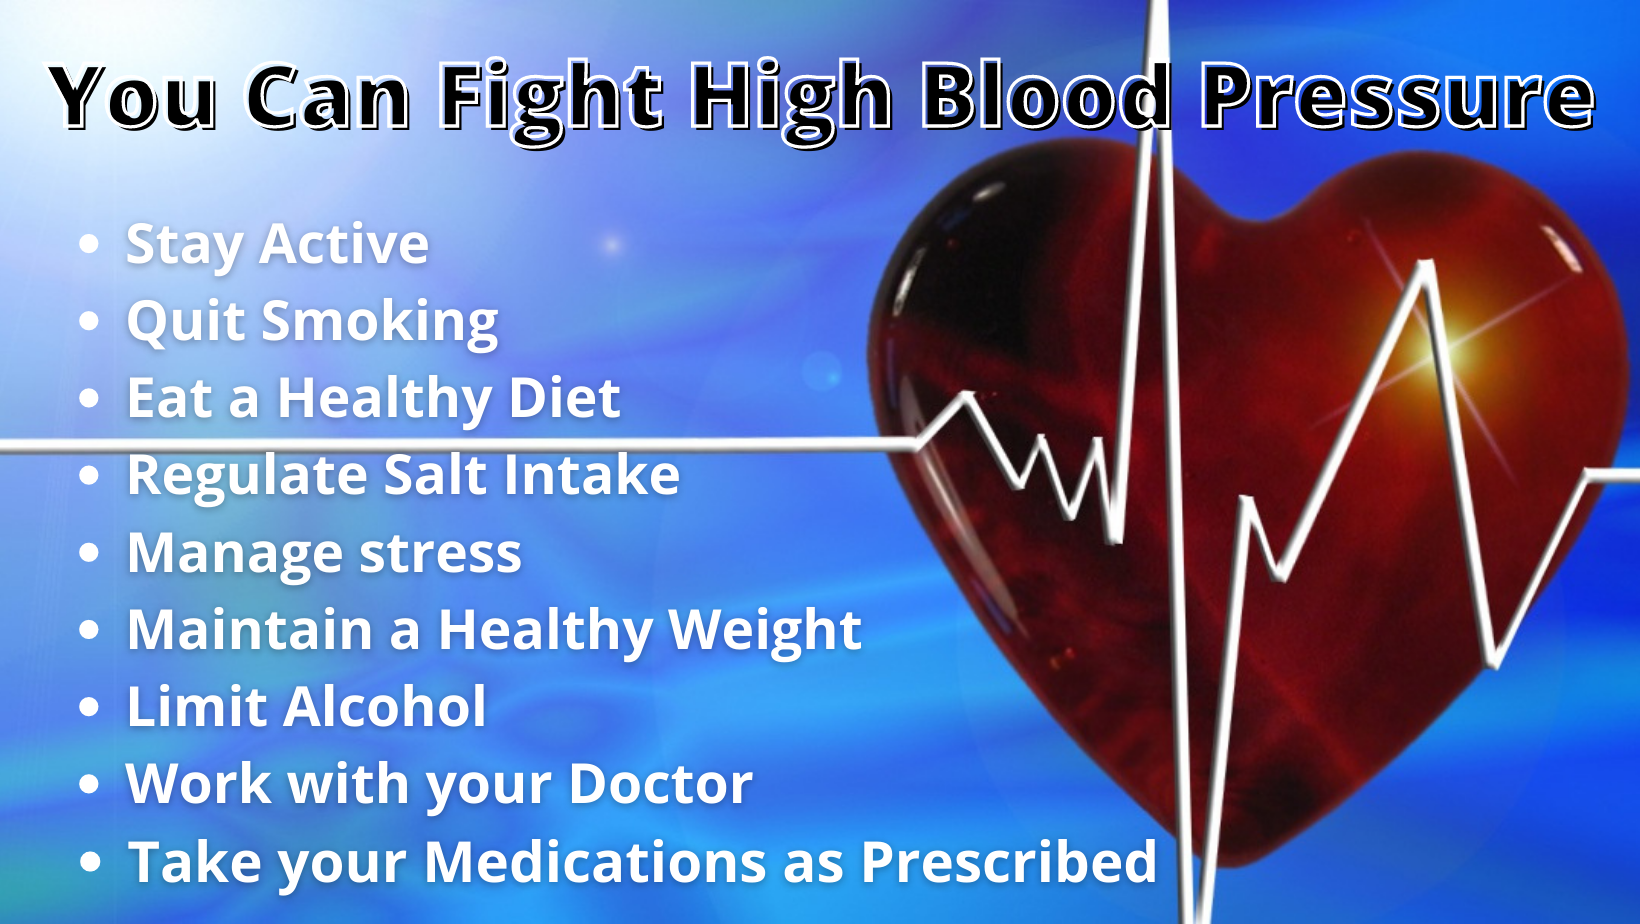 Steps To Lower Your High Blood Pressure